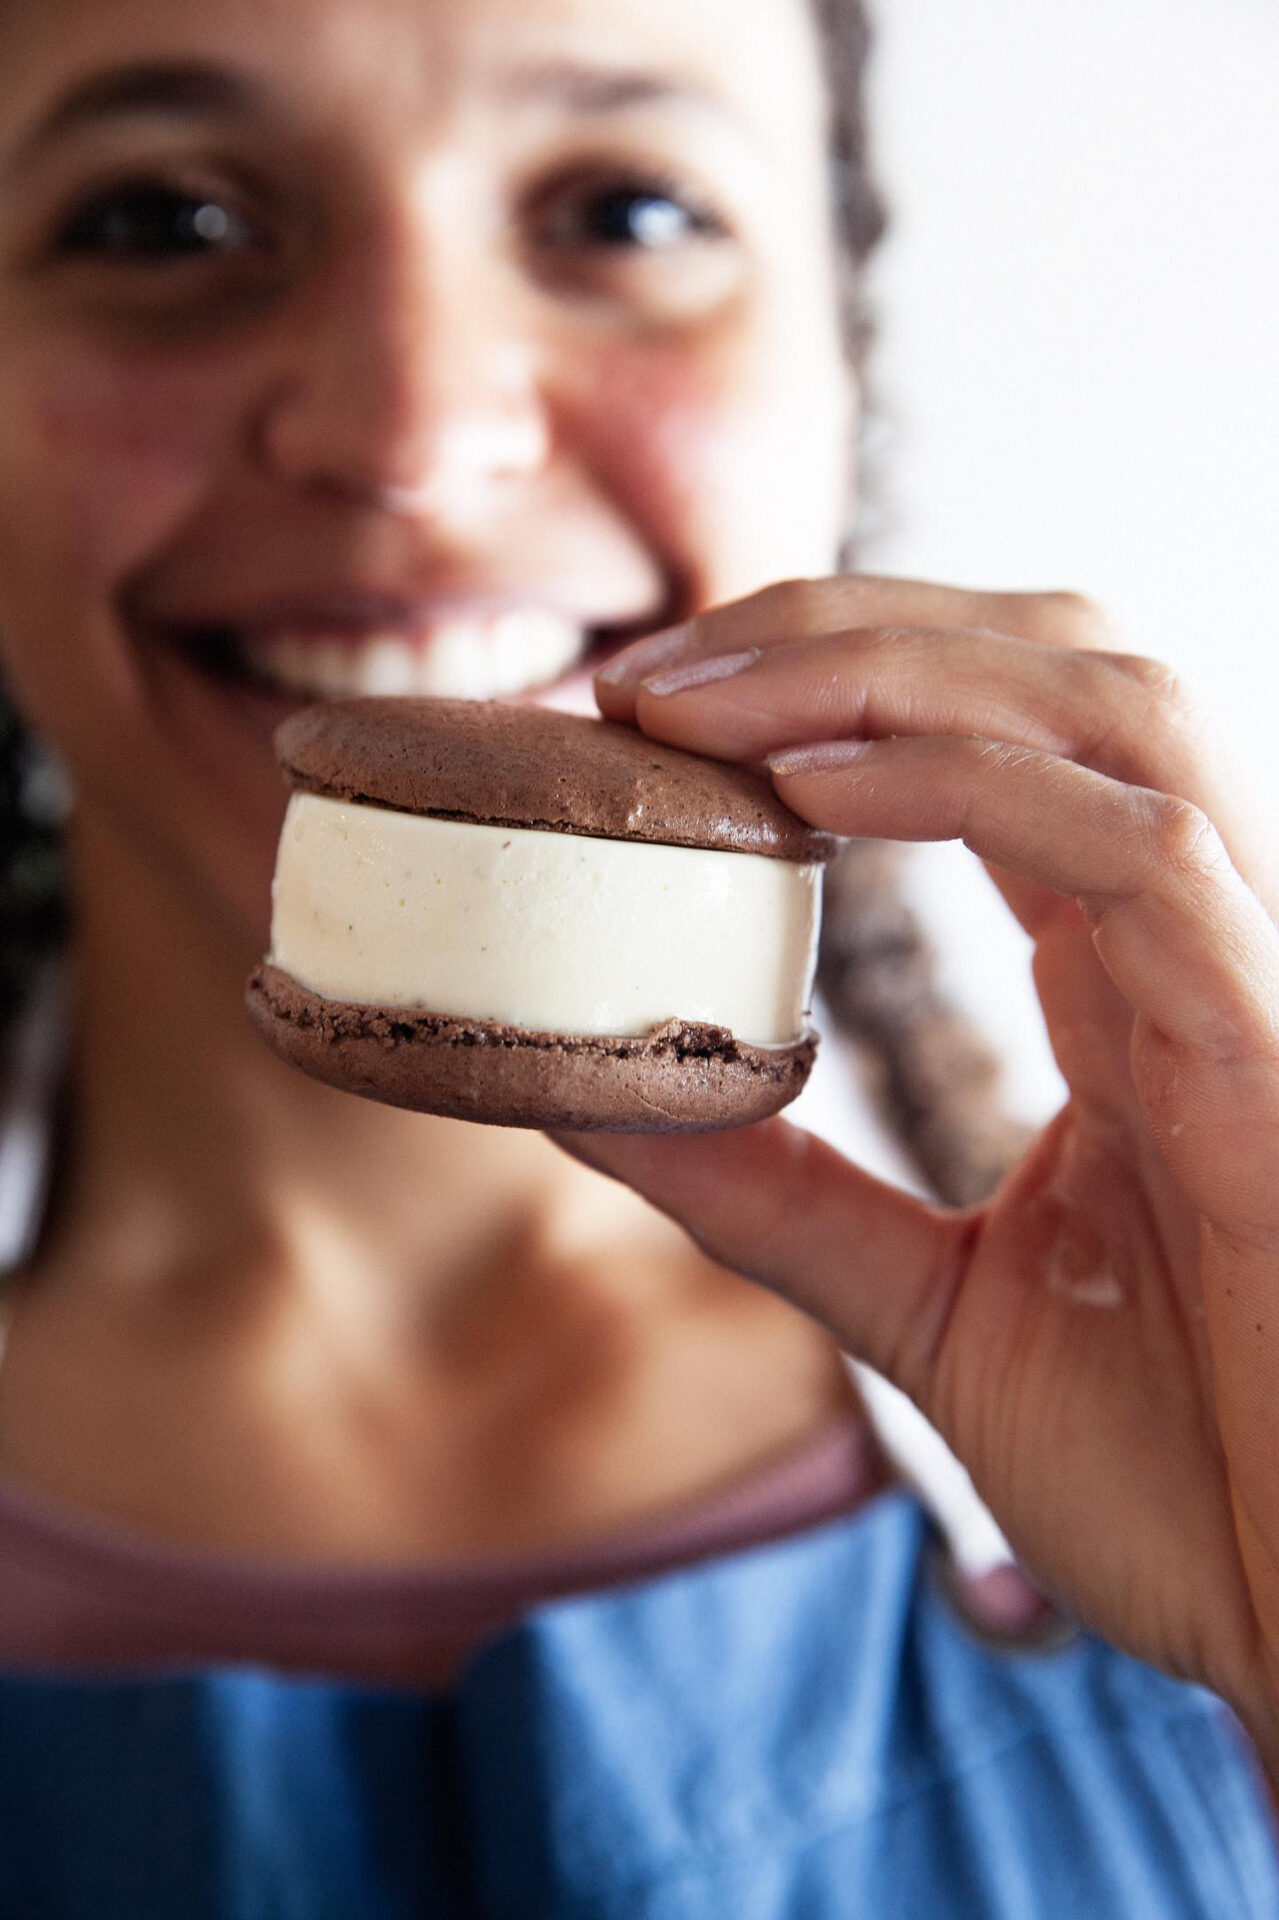 Owner Emily Harpster holding up an ice cream sandwich from SugarBear Ice Cream in Charlottesville, Virginia